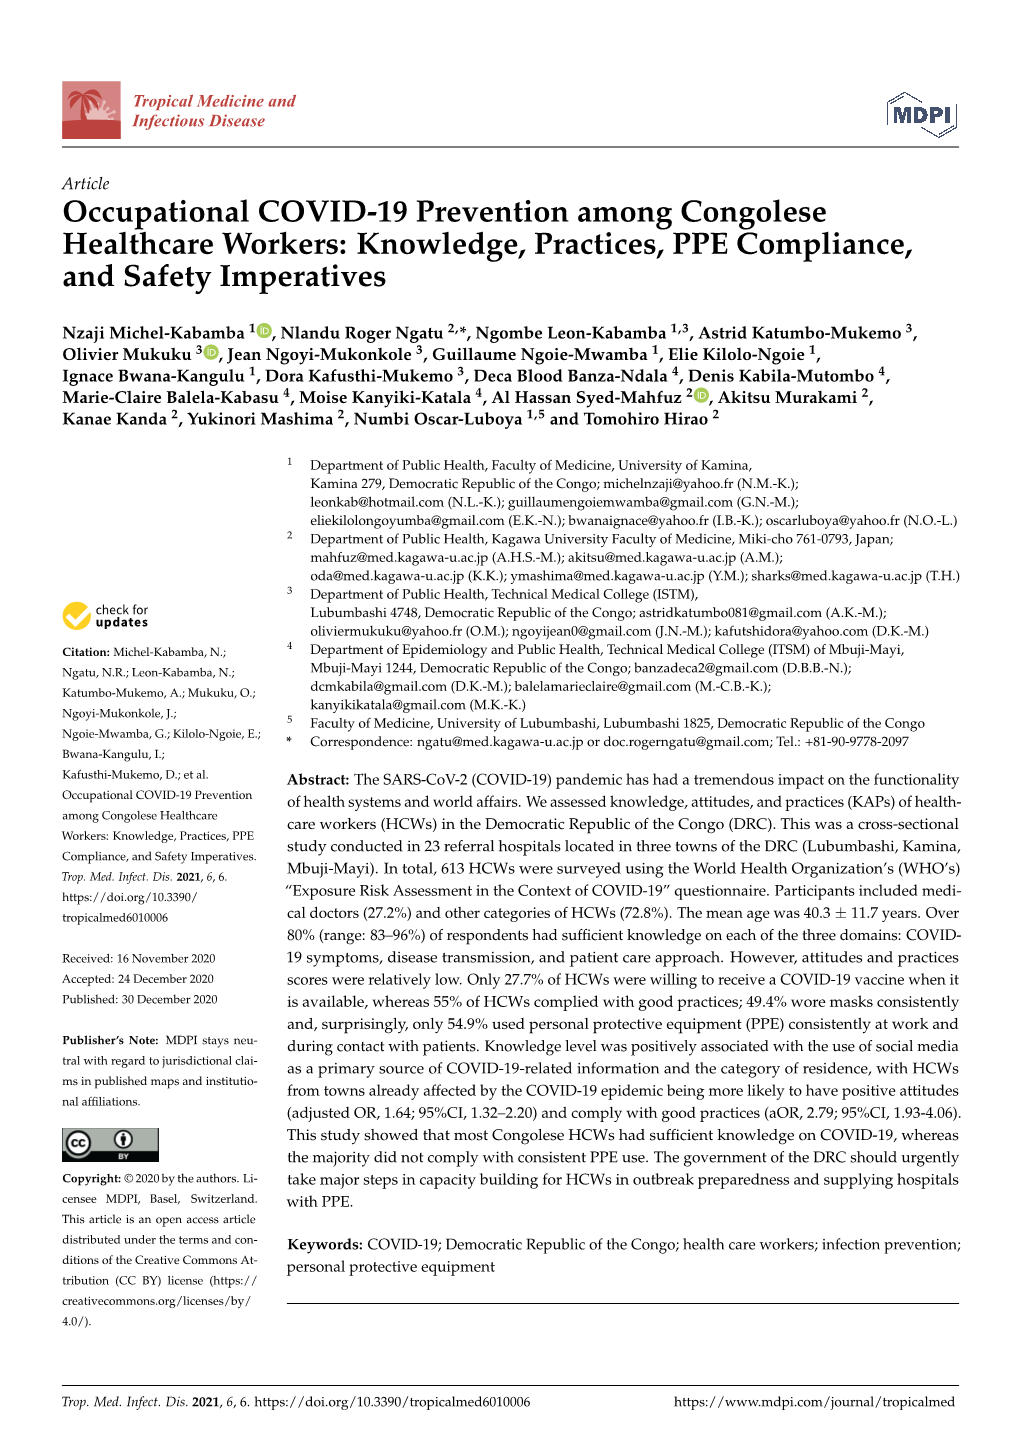 Occupational COVID-19 Prevention Among Congolese Healthcare Workers: Knowledge, Practices, PPE Compliance, and Safety Imperatives